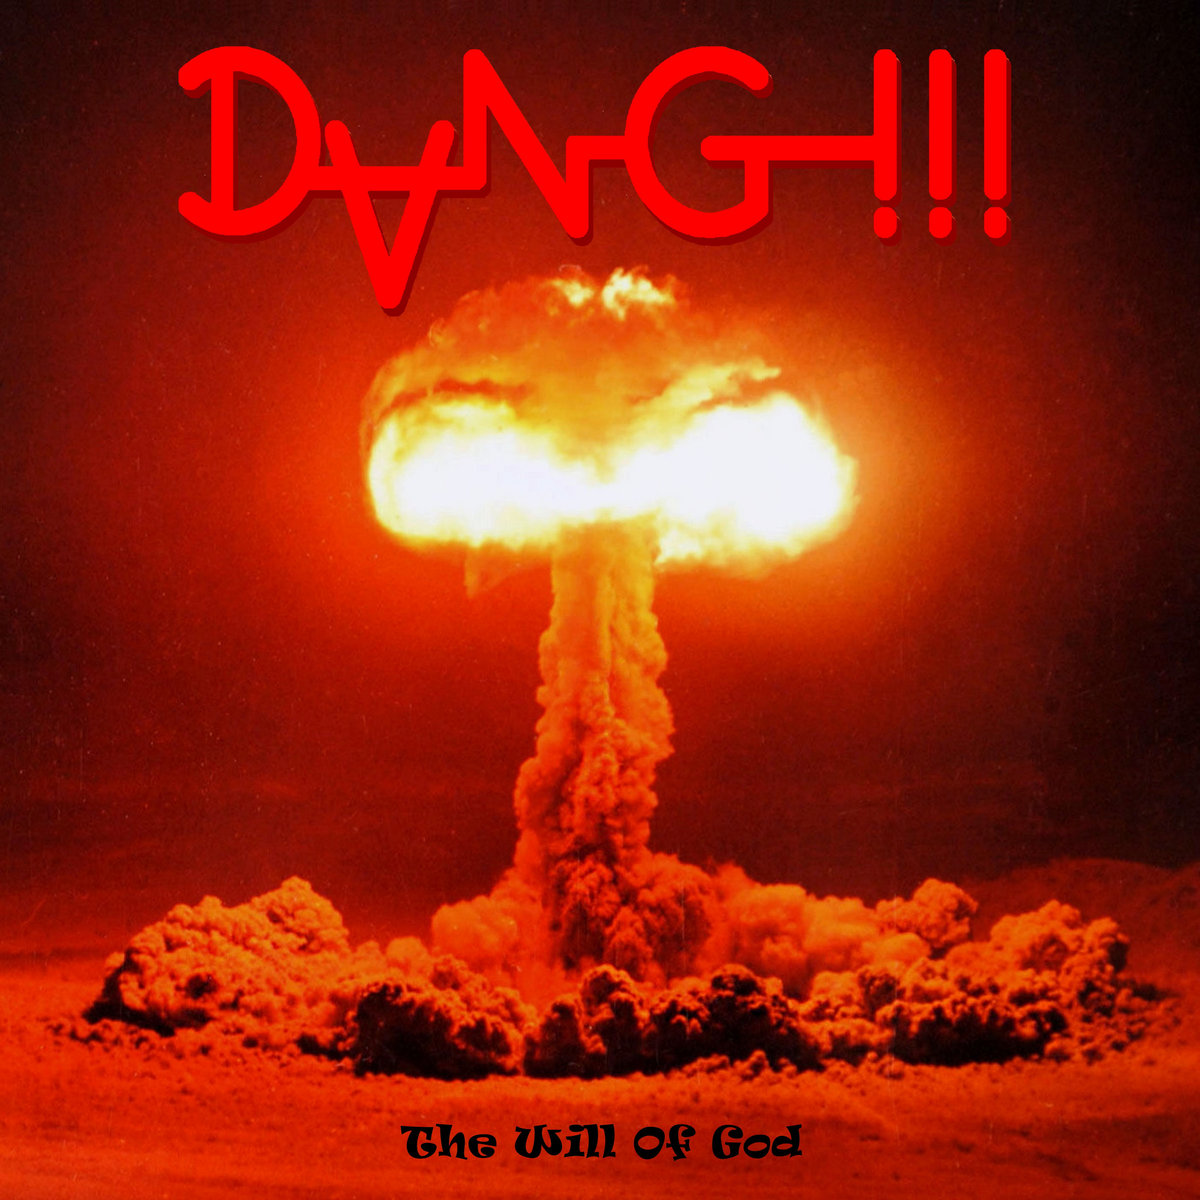 DANG!!! – The Will of God